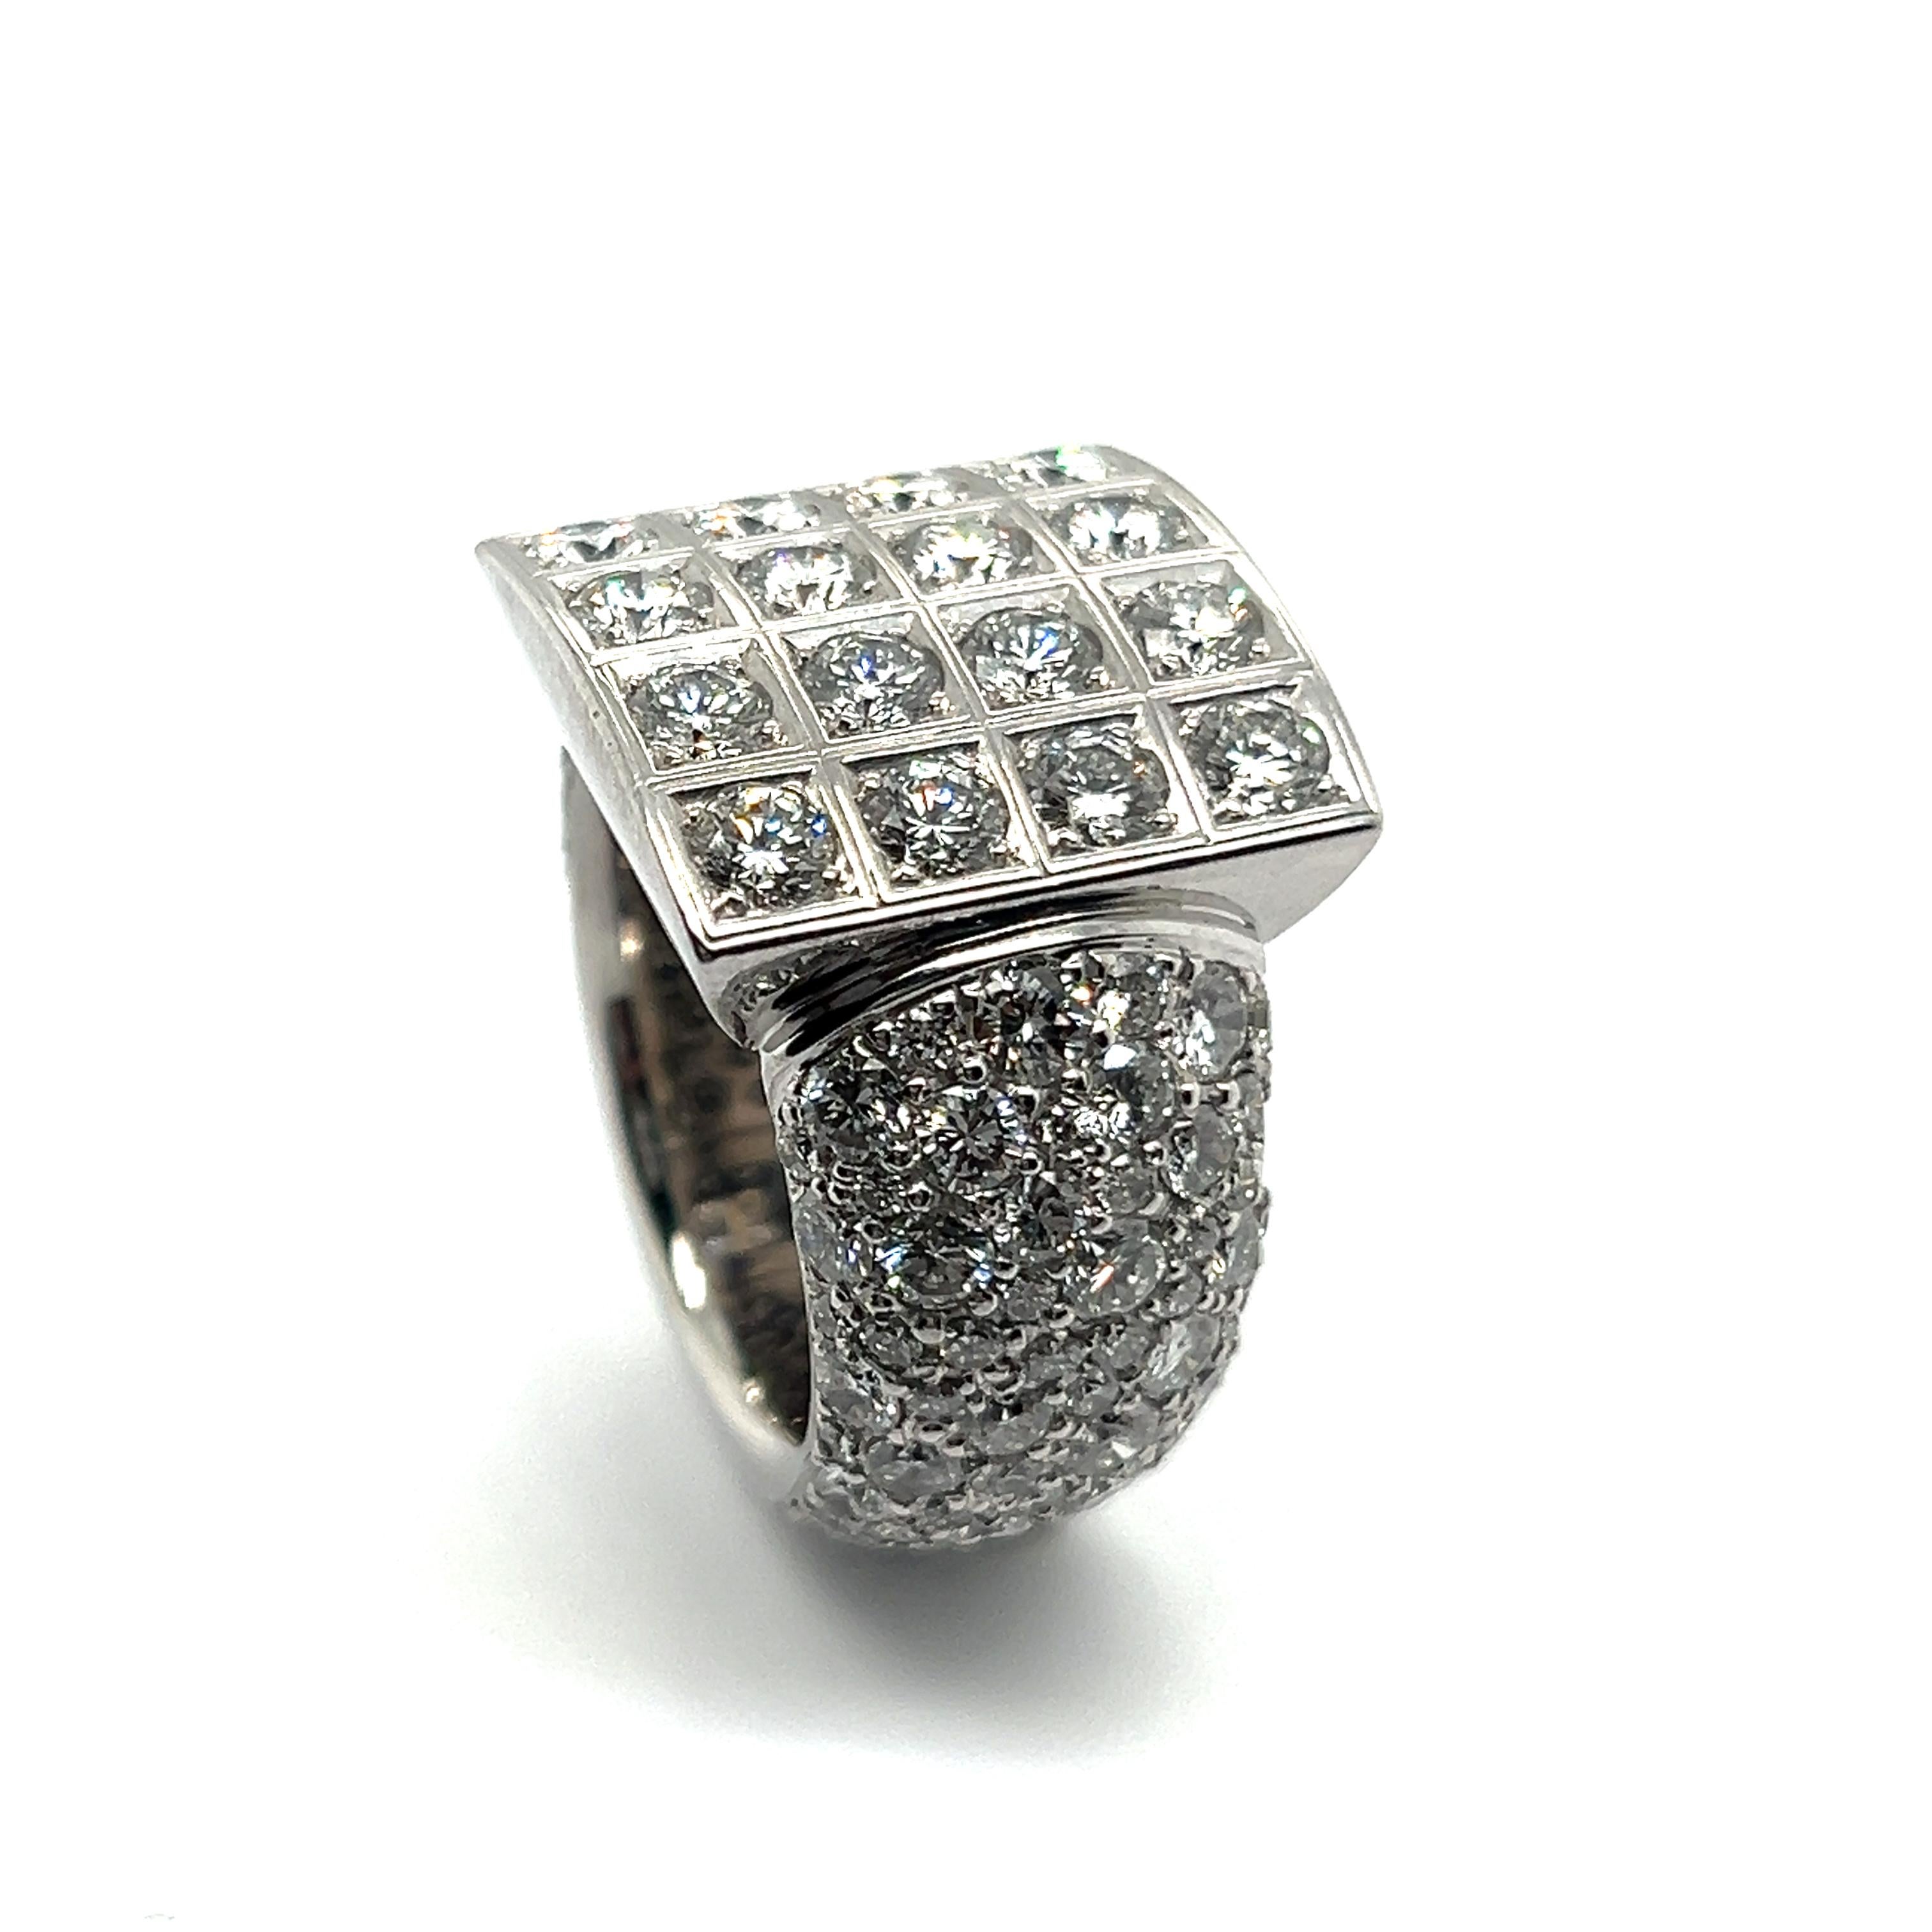 Bold Graphic Ring with Diamonds in 18 Karat White Gold by Majo Fruithof For Sale 3